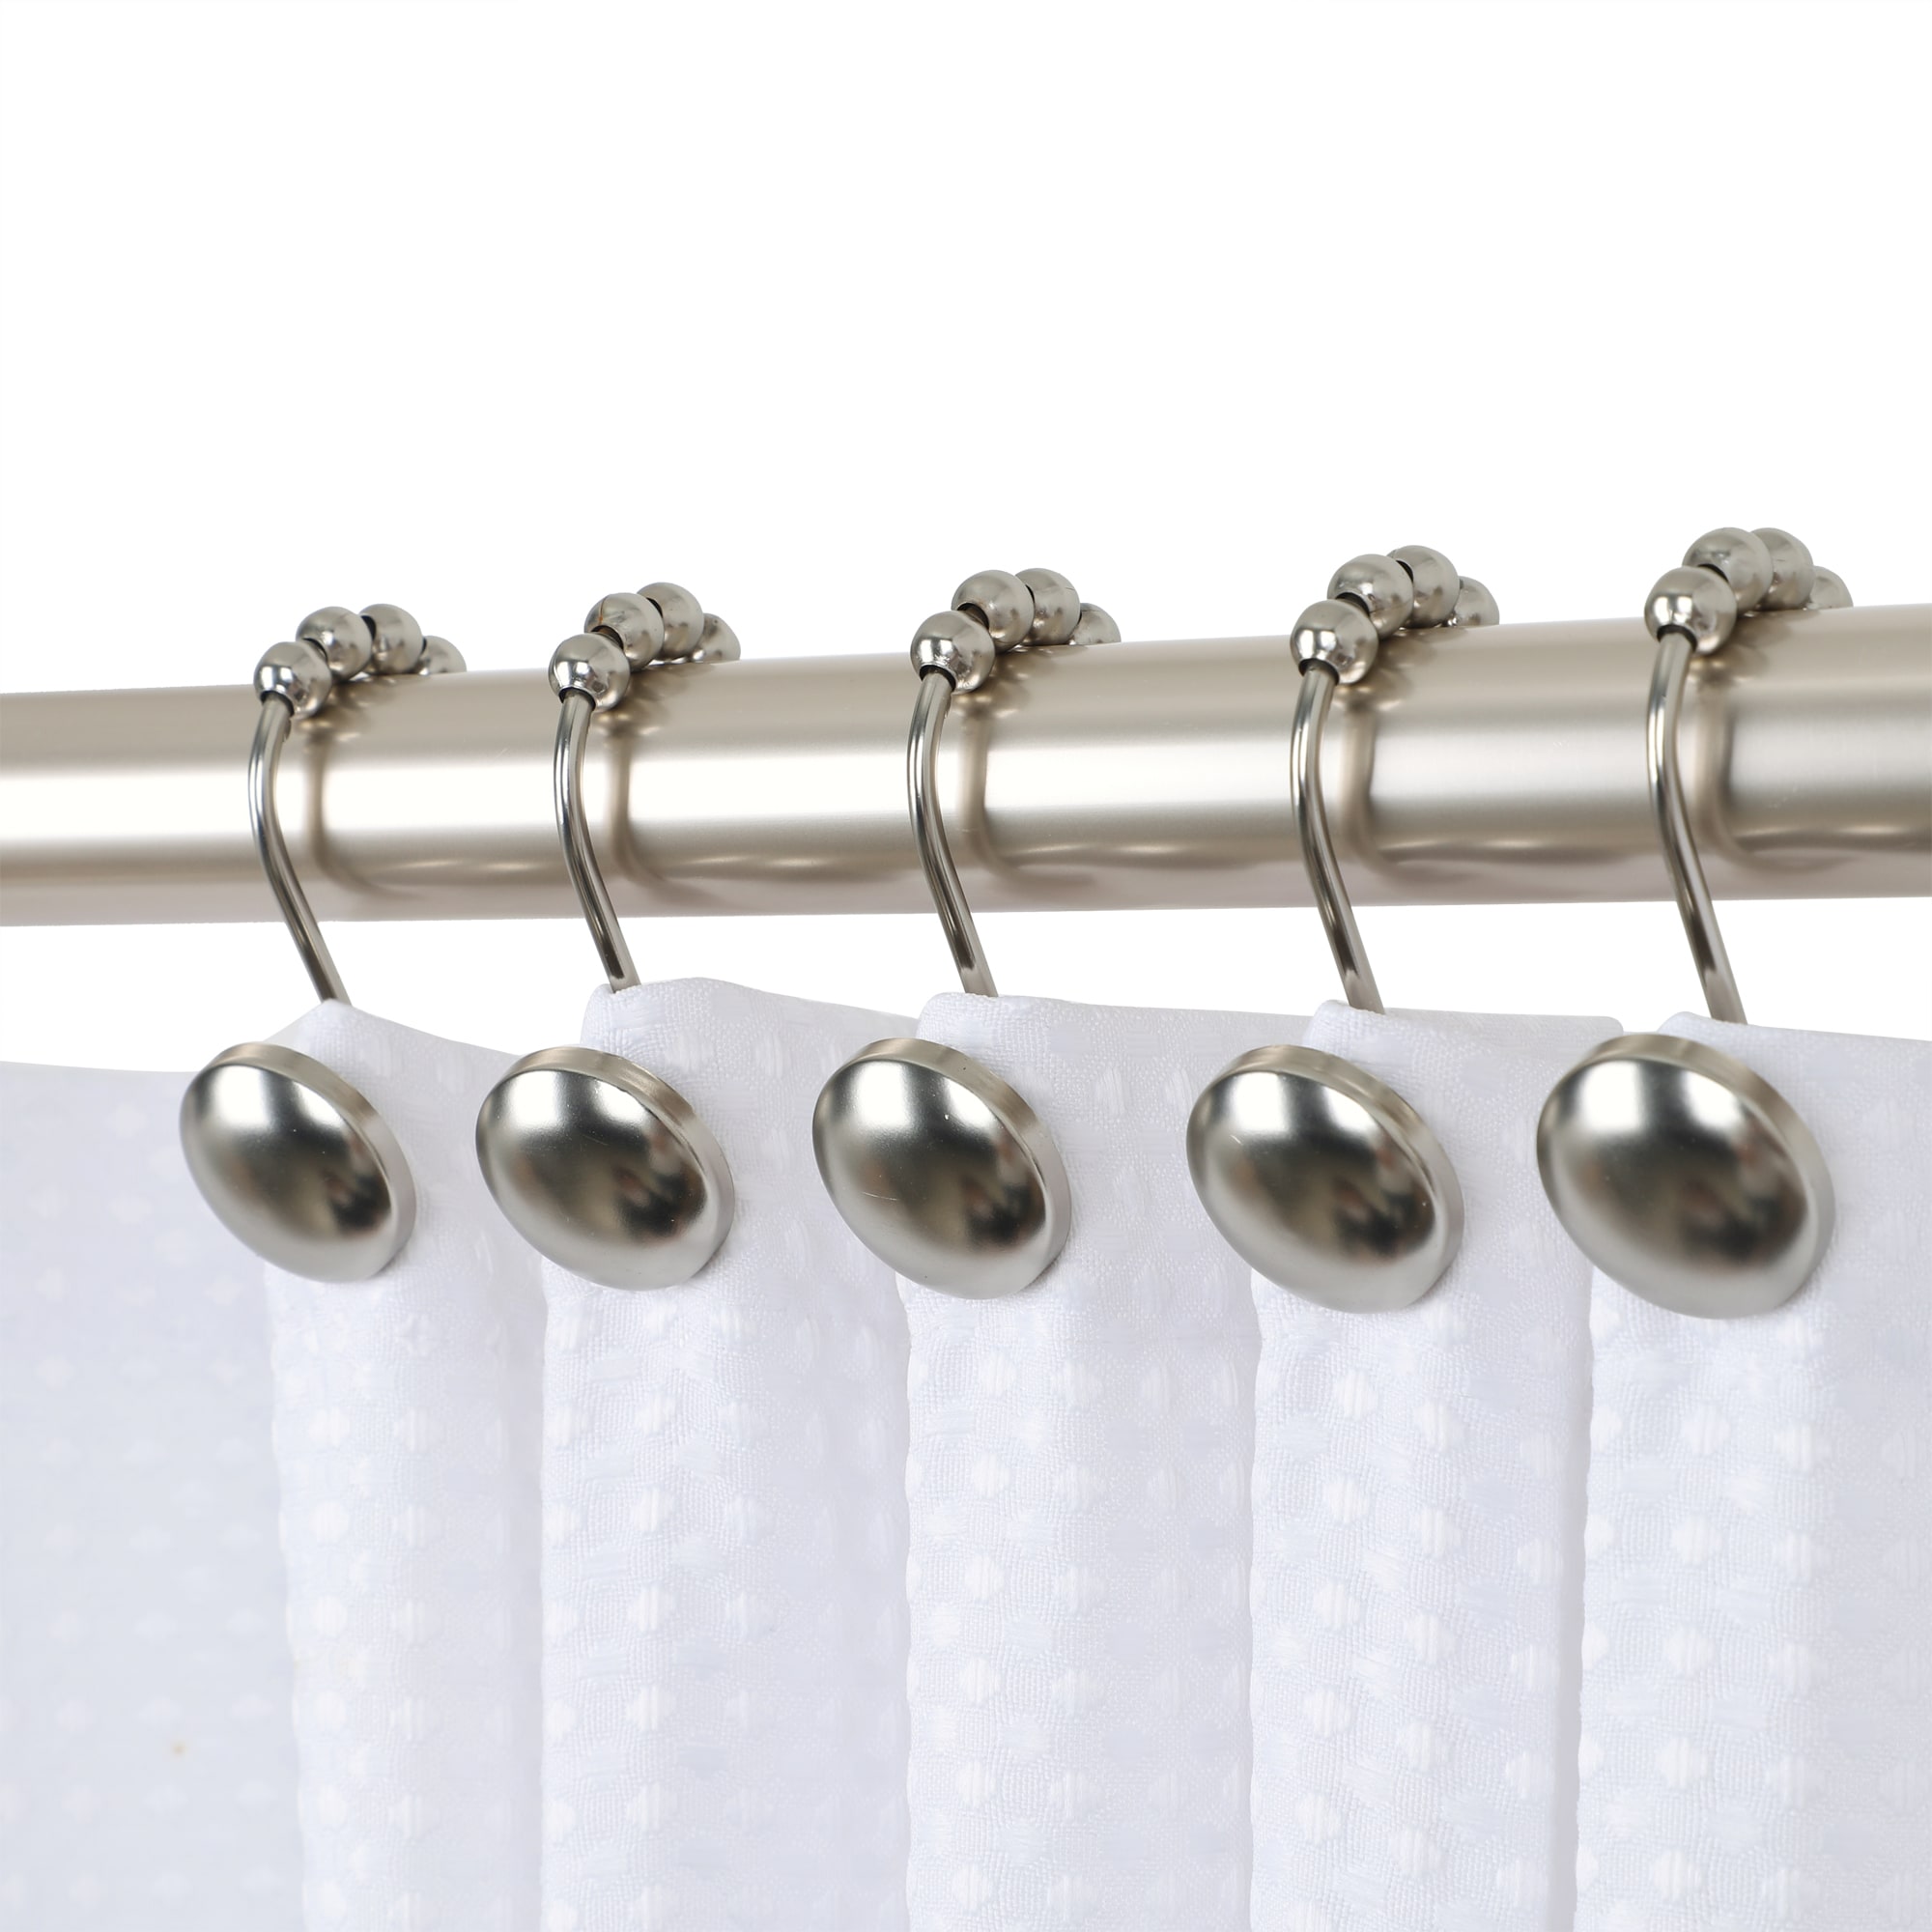 Utopia Alley HK6BN Beatrice Shower Curtain Hooks for Bathroom Shower Rods Curtains, Set of 12 - Brushed Nickel